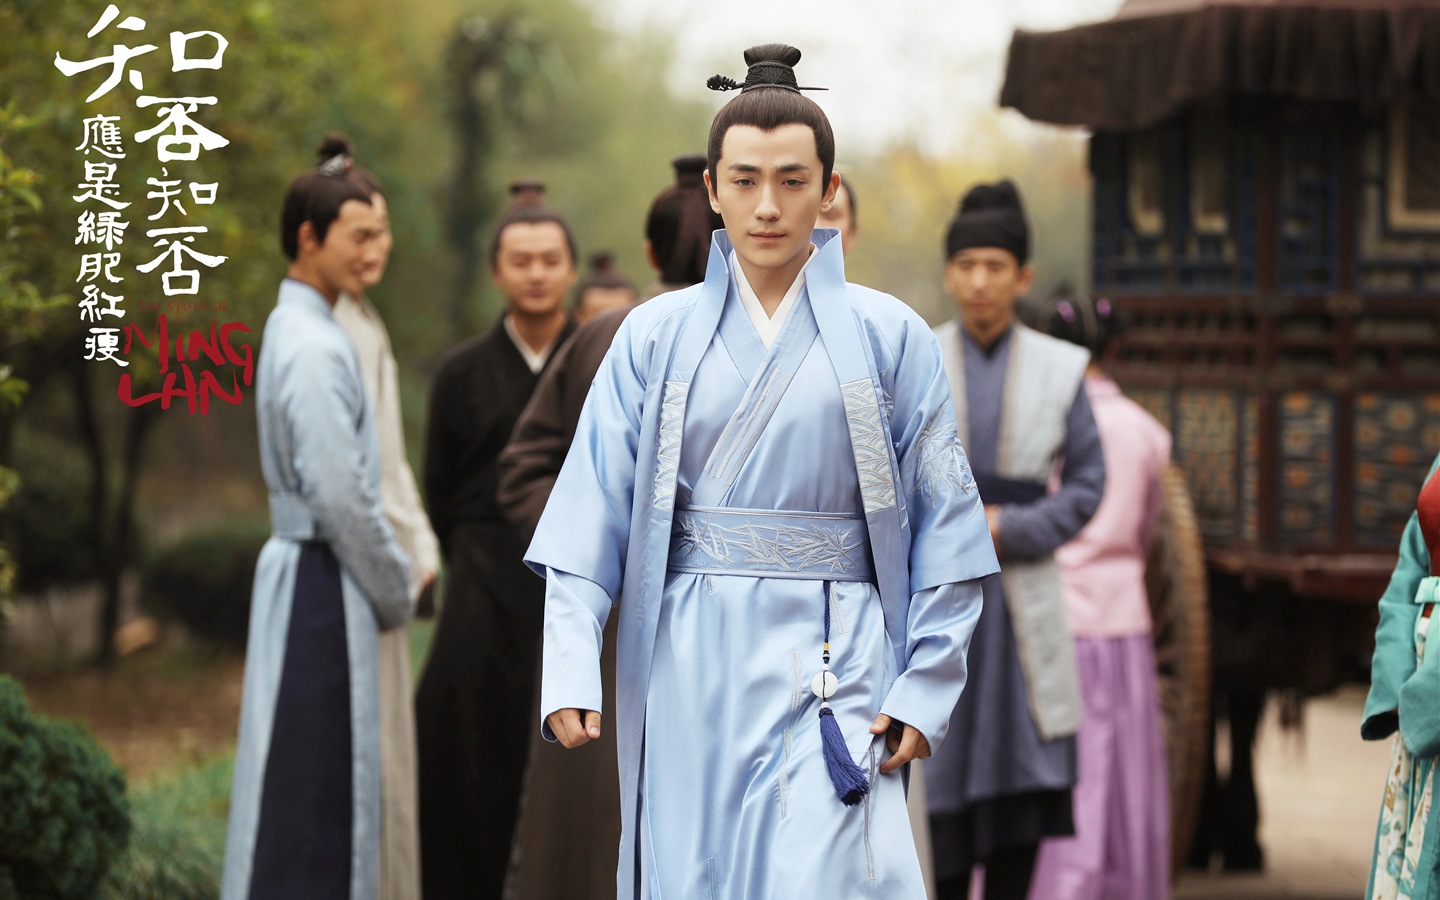 The Story Of MingLan, TV series HD wallpapers #54 - 1440x900